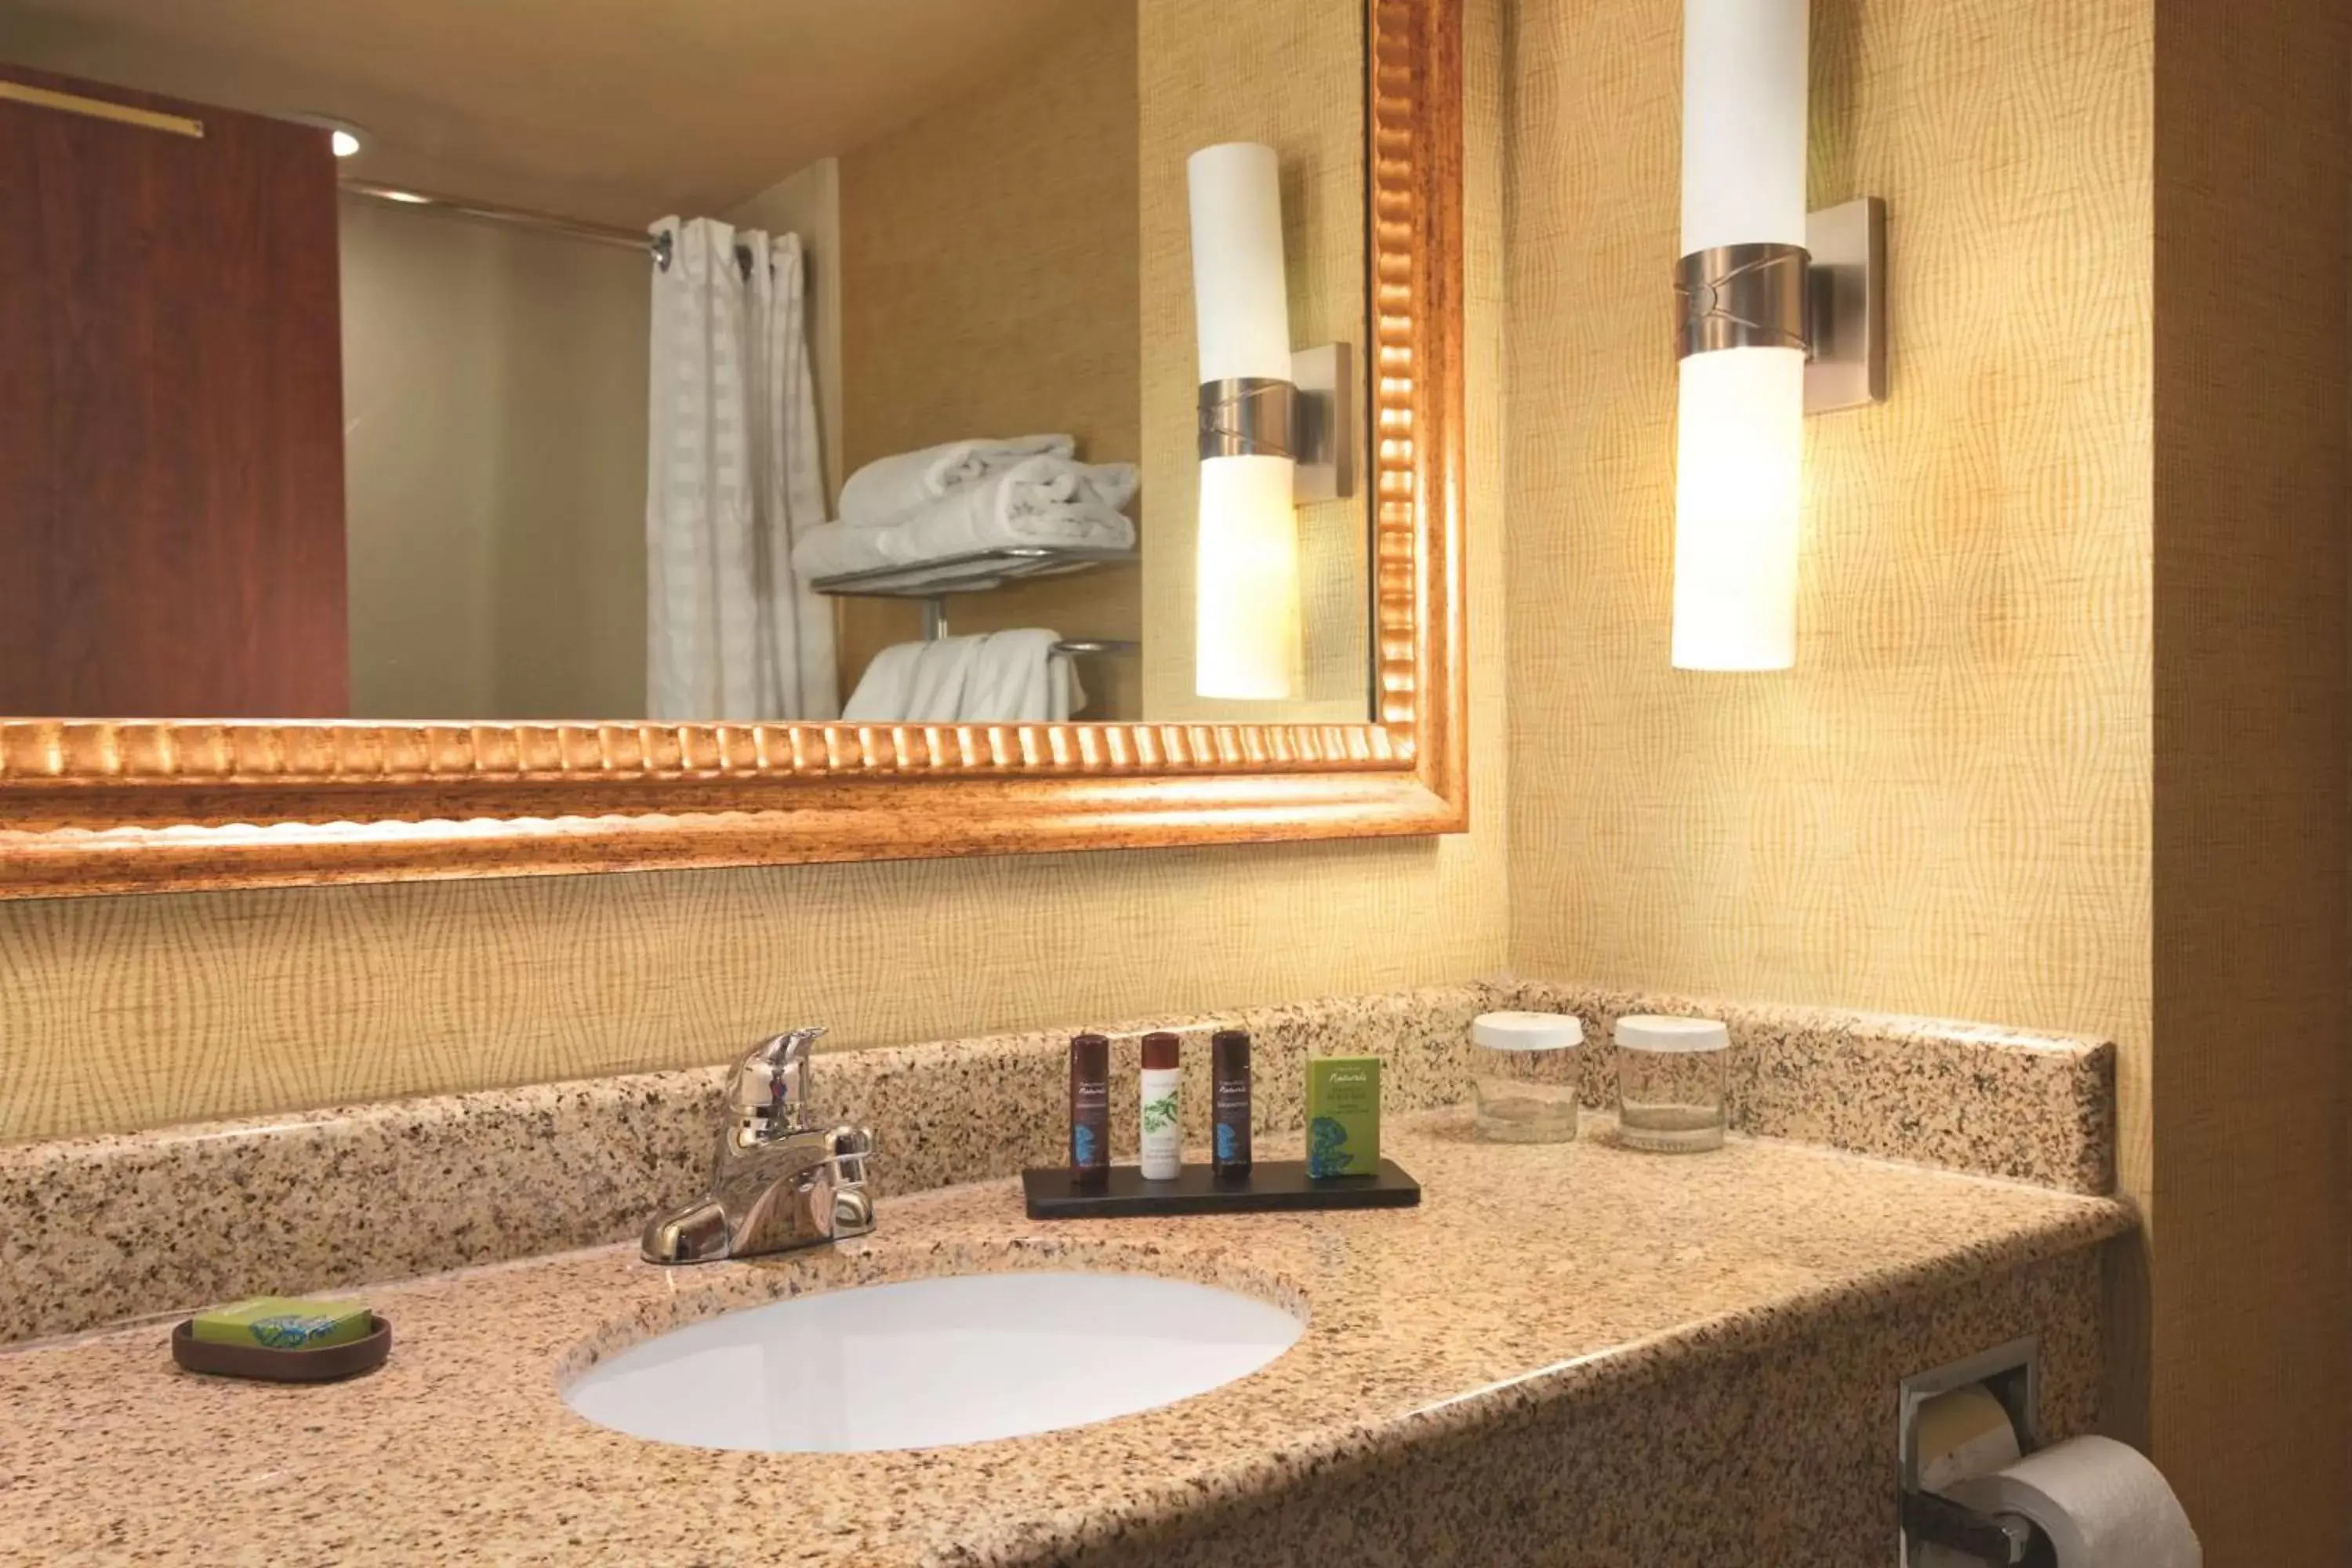 Bathroom in Embassy Suites East Peoria Hotel and Riverfront Conference Center